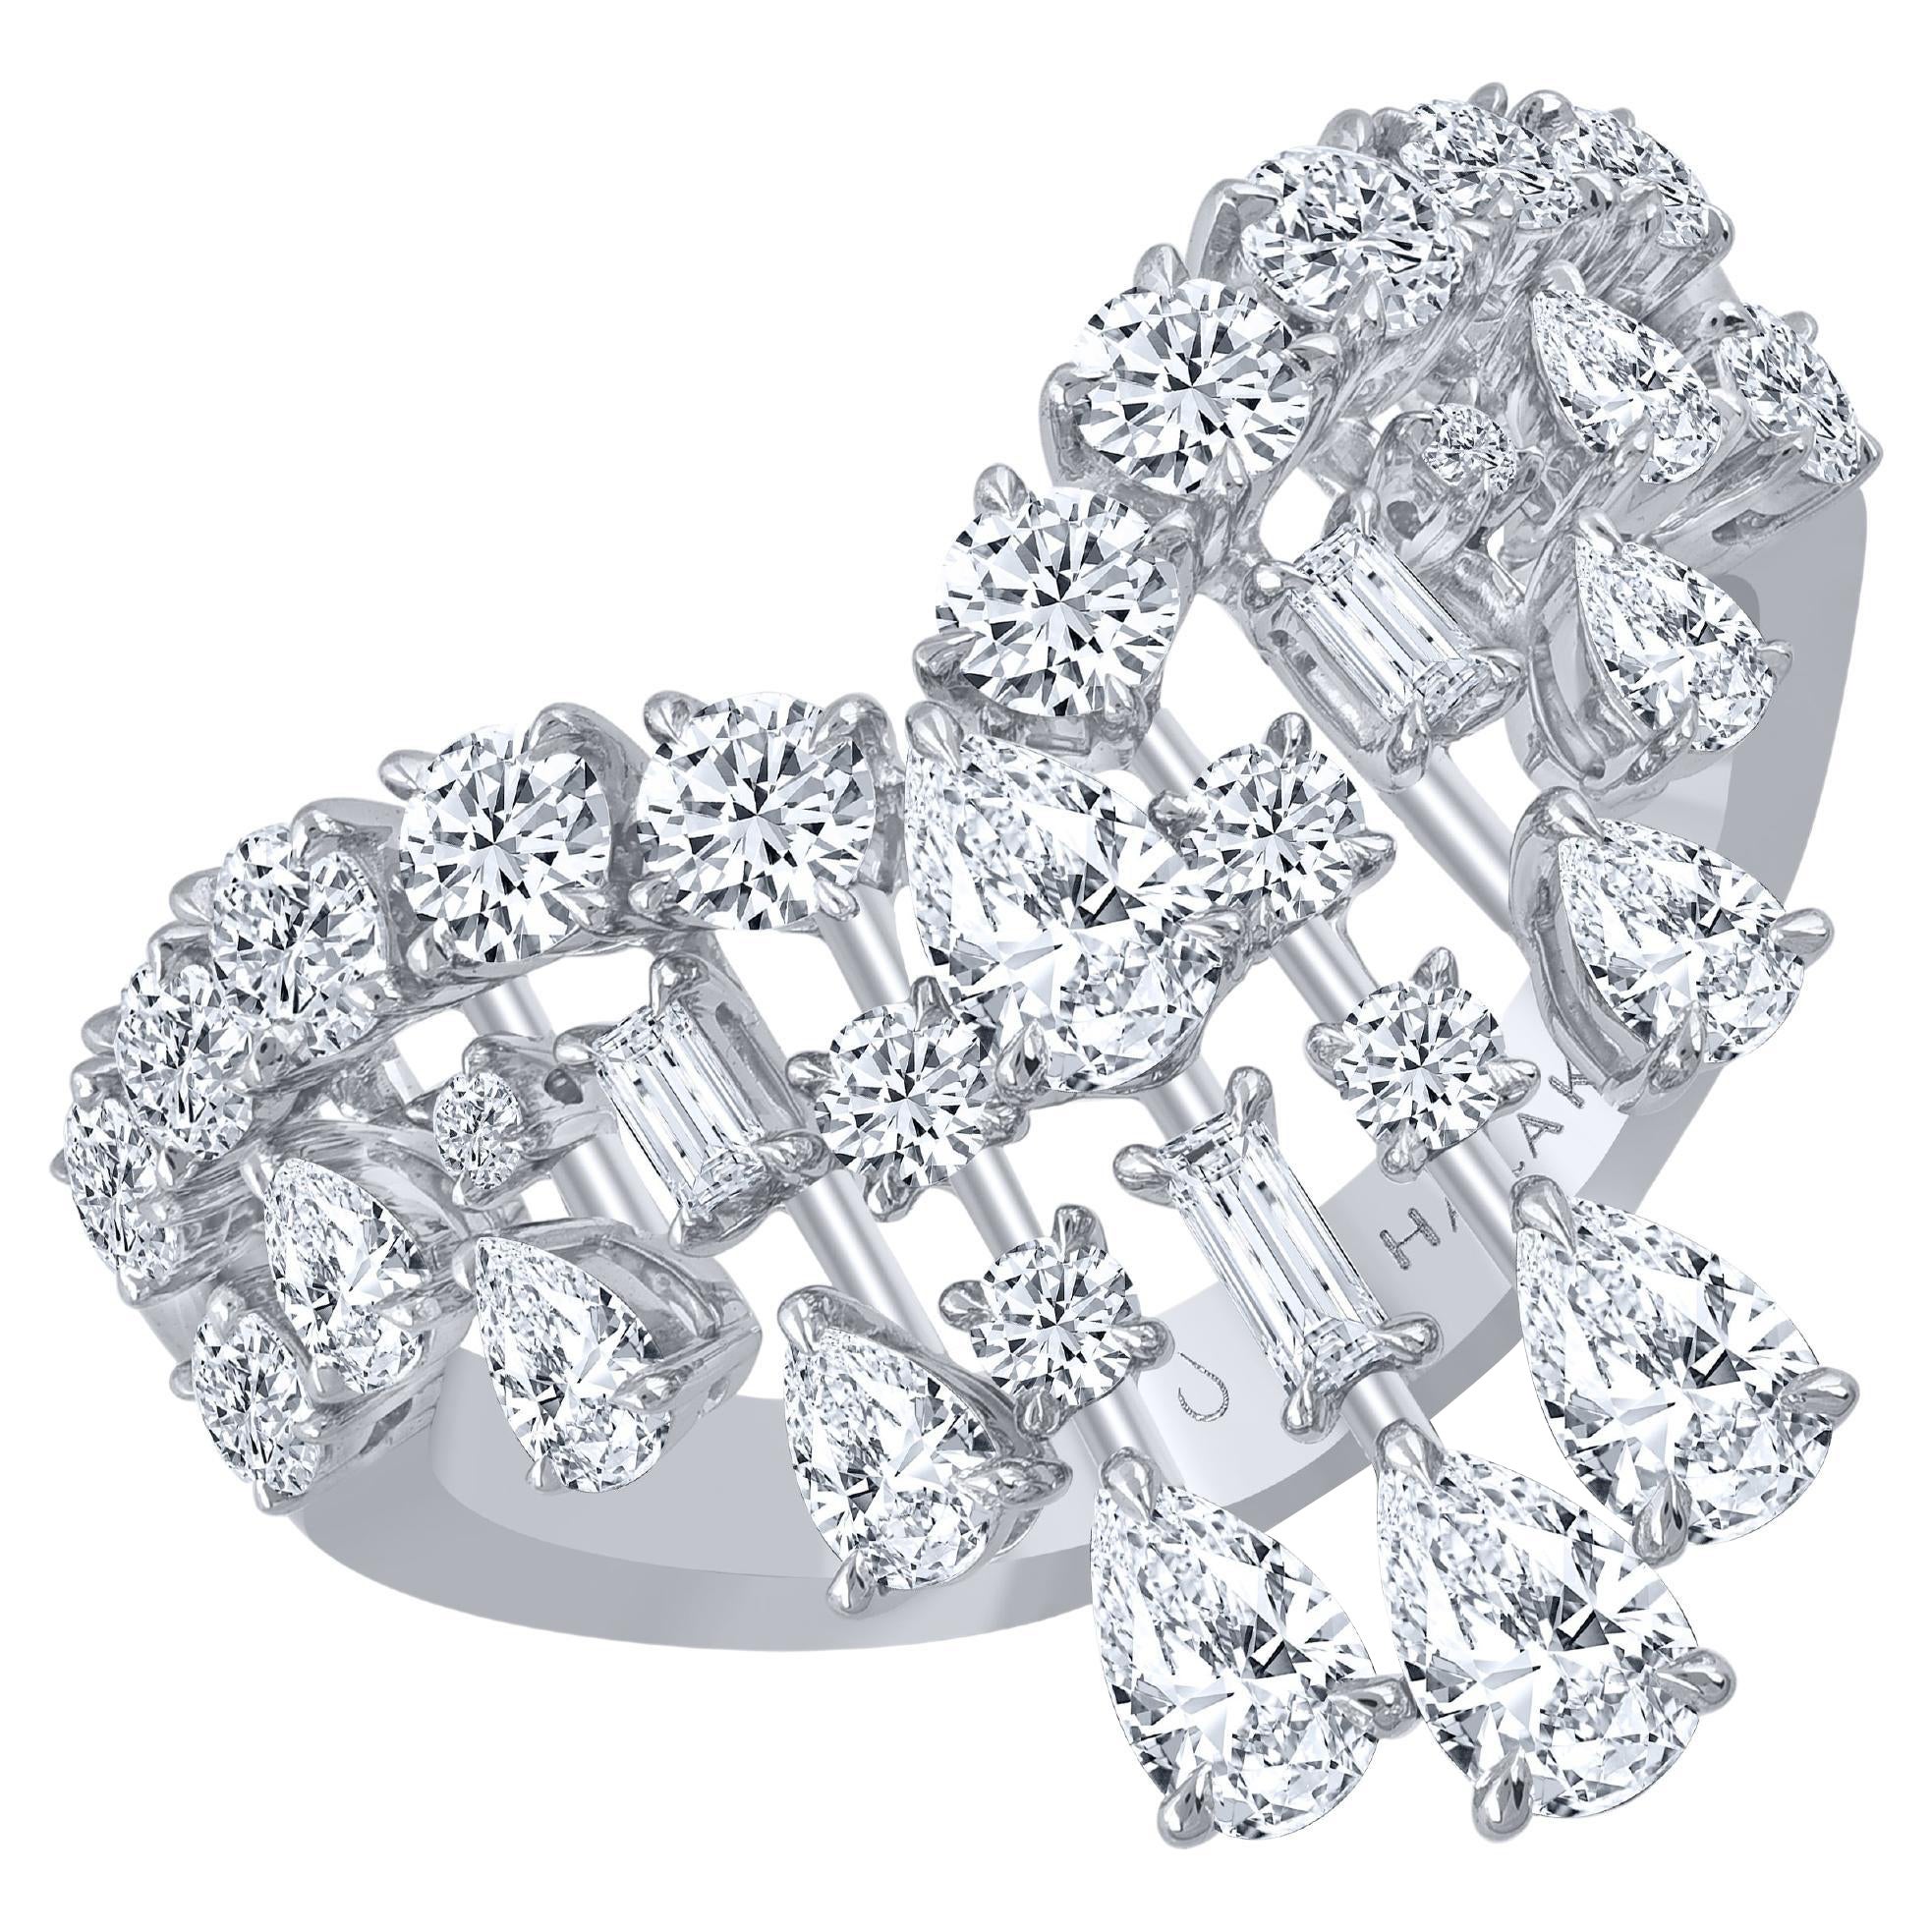 HARAKH Colorless Diamond 1.65 Carat Cluster Ring in 18 Kt White Gold